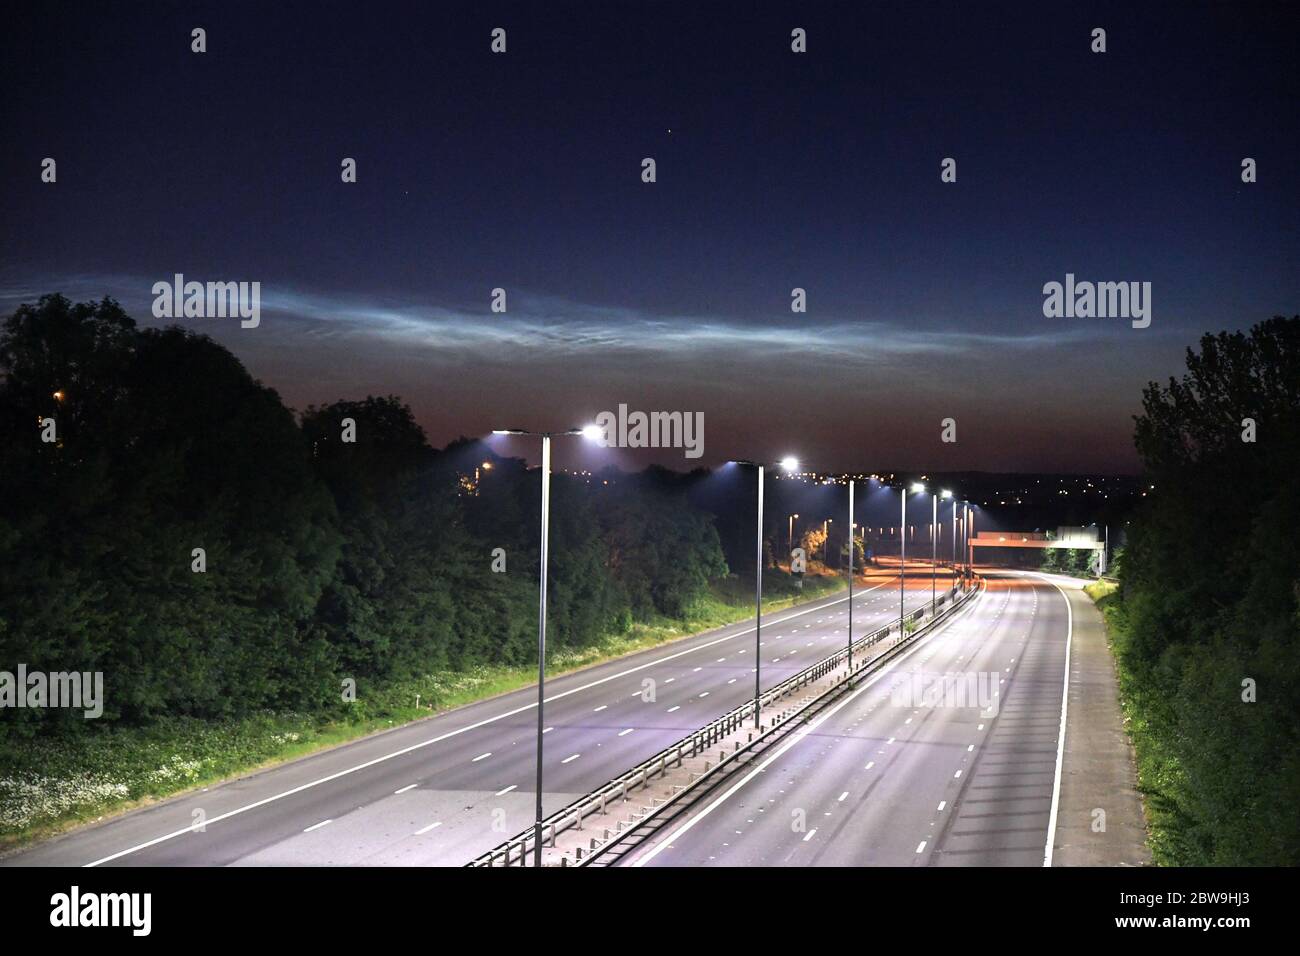 West Bromwich, West Midlands, May 31st 2020. A view from the M5 motorway from West Bromwich, towards Walsall with rare Noctilucent clouds illuminated in the nights sky. The tenuous cloud-like phenomena only form in the upper atmosphere of Earth. Unlike lower clouds that are associated with weather, these clouds form very high, at about 85,300 meters (53 miles) above the Earth's surface, in the mesosphere. They are likely made of frozen water or ice crystals and are only visible during astronomical twilight. The word noctilucent roughly means ‘night shining' in Latin. These are the highest clou Stock Photo